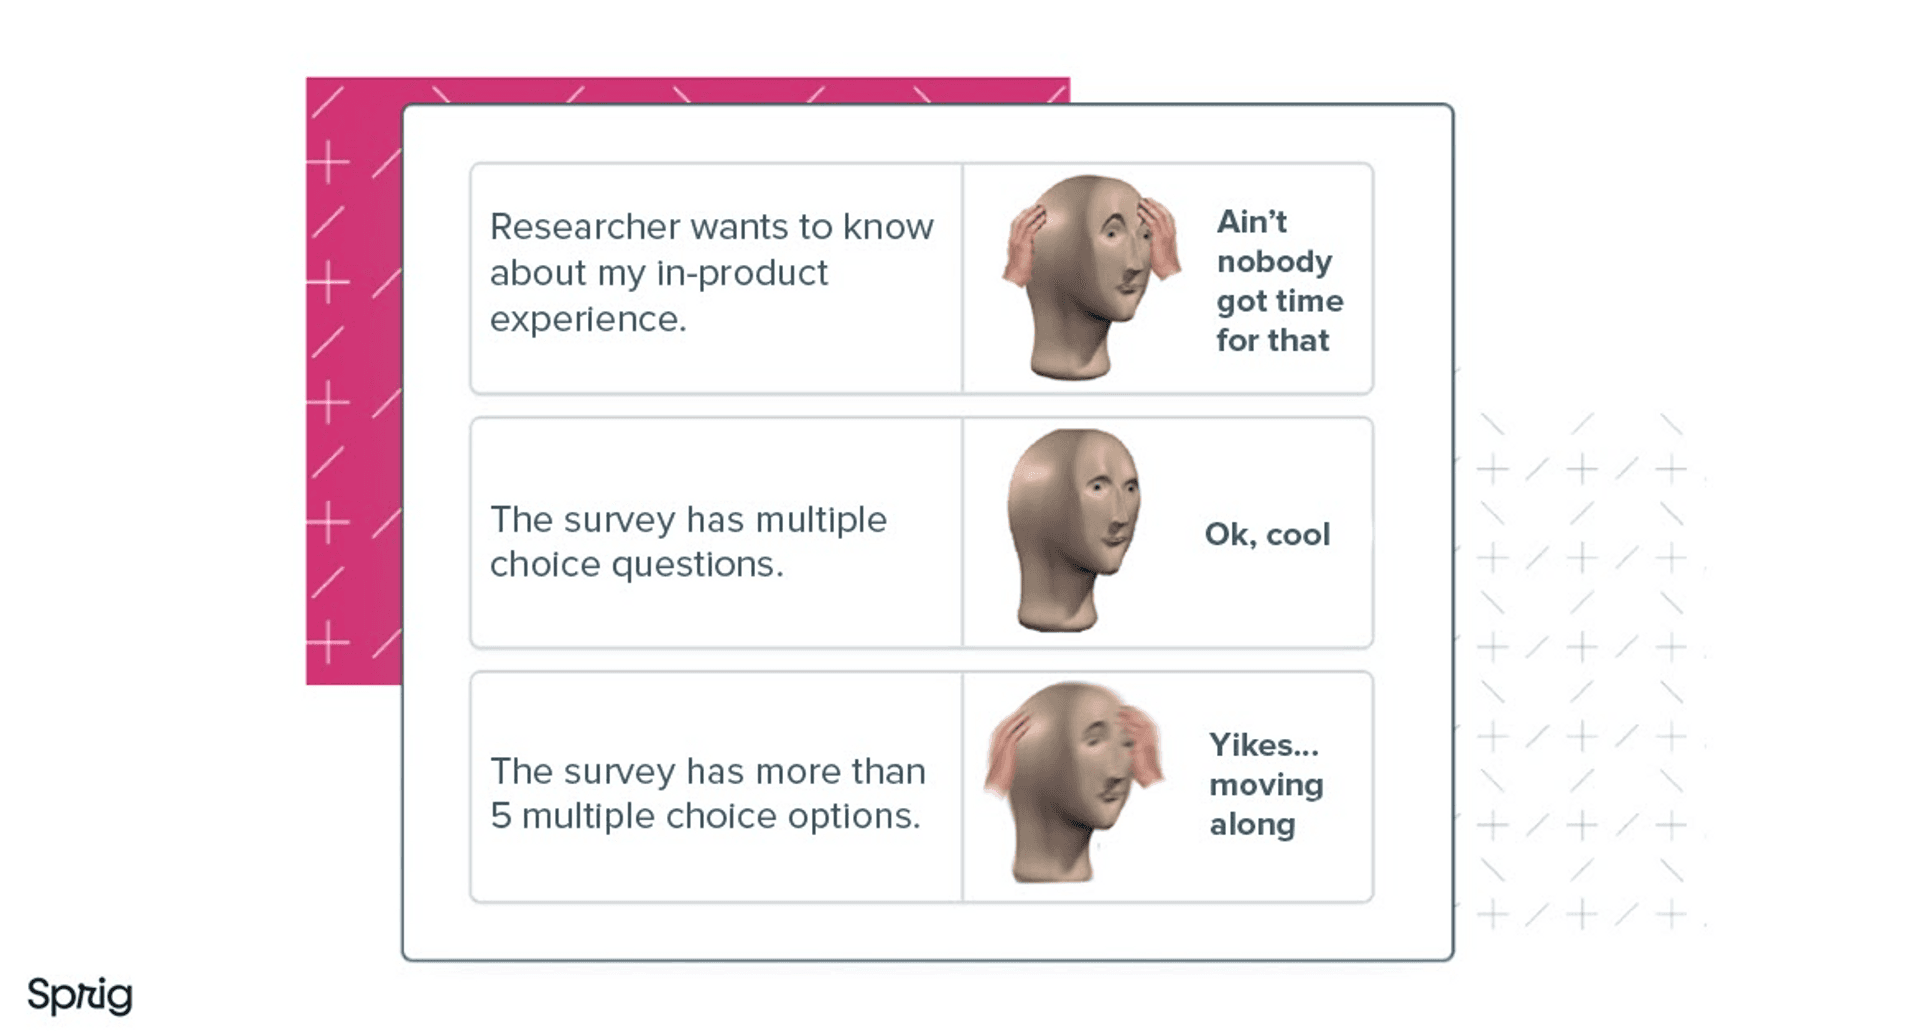 Moods in a survey